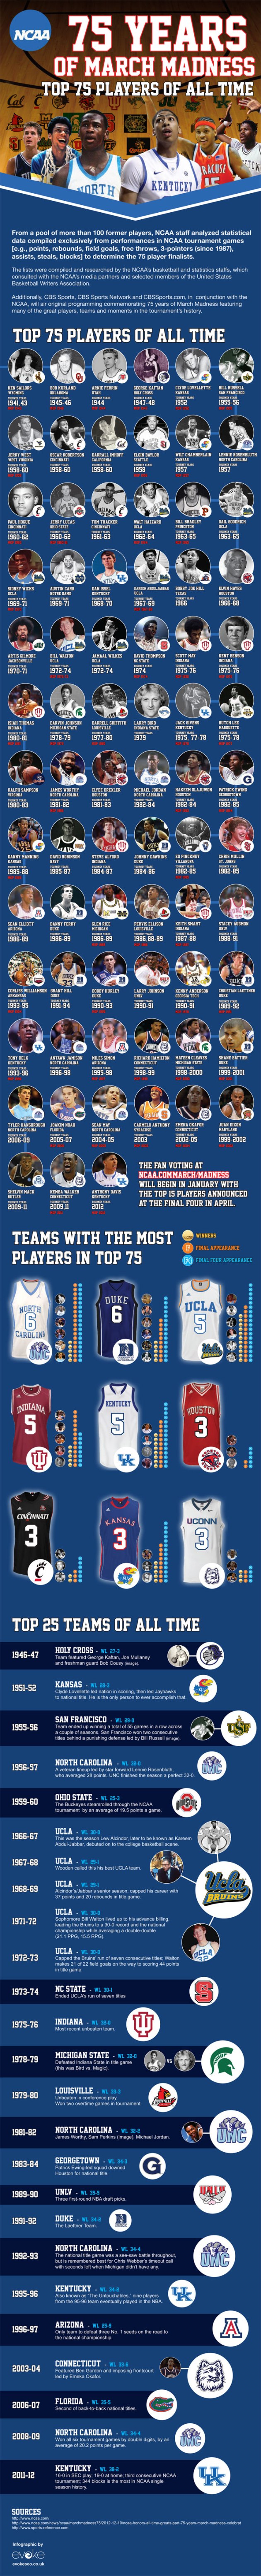 The Top 75 Basketball Players of All Time!